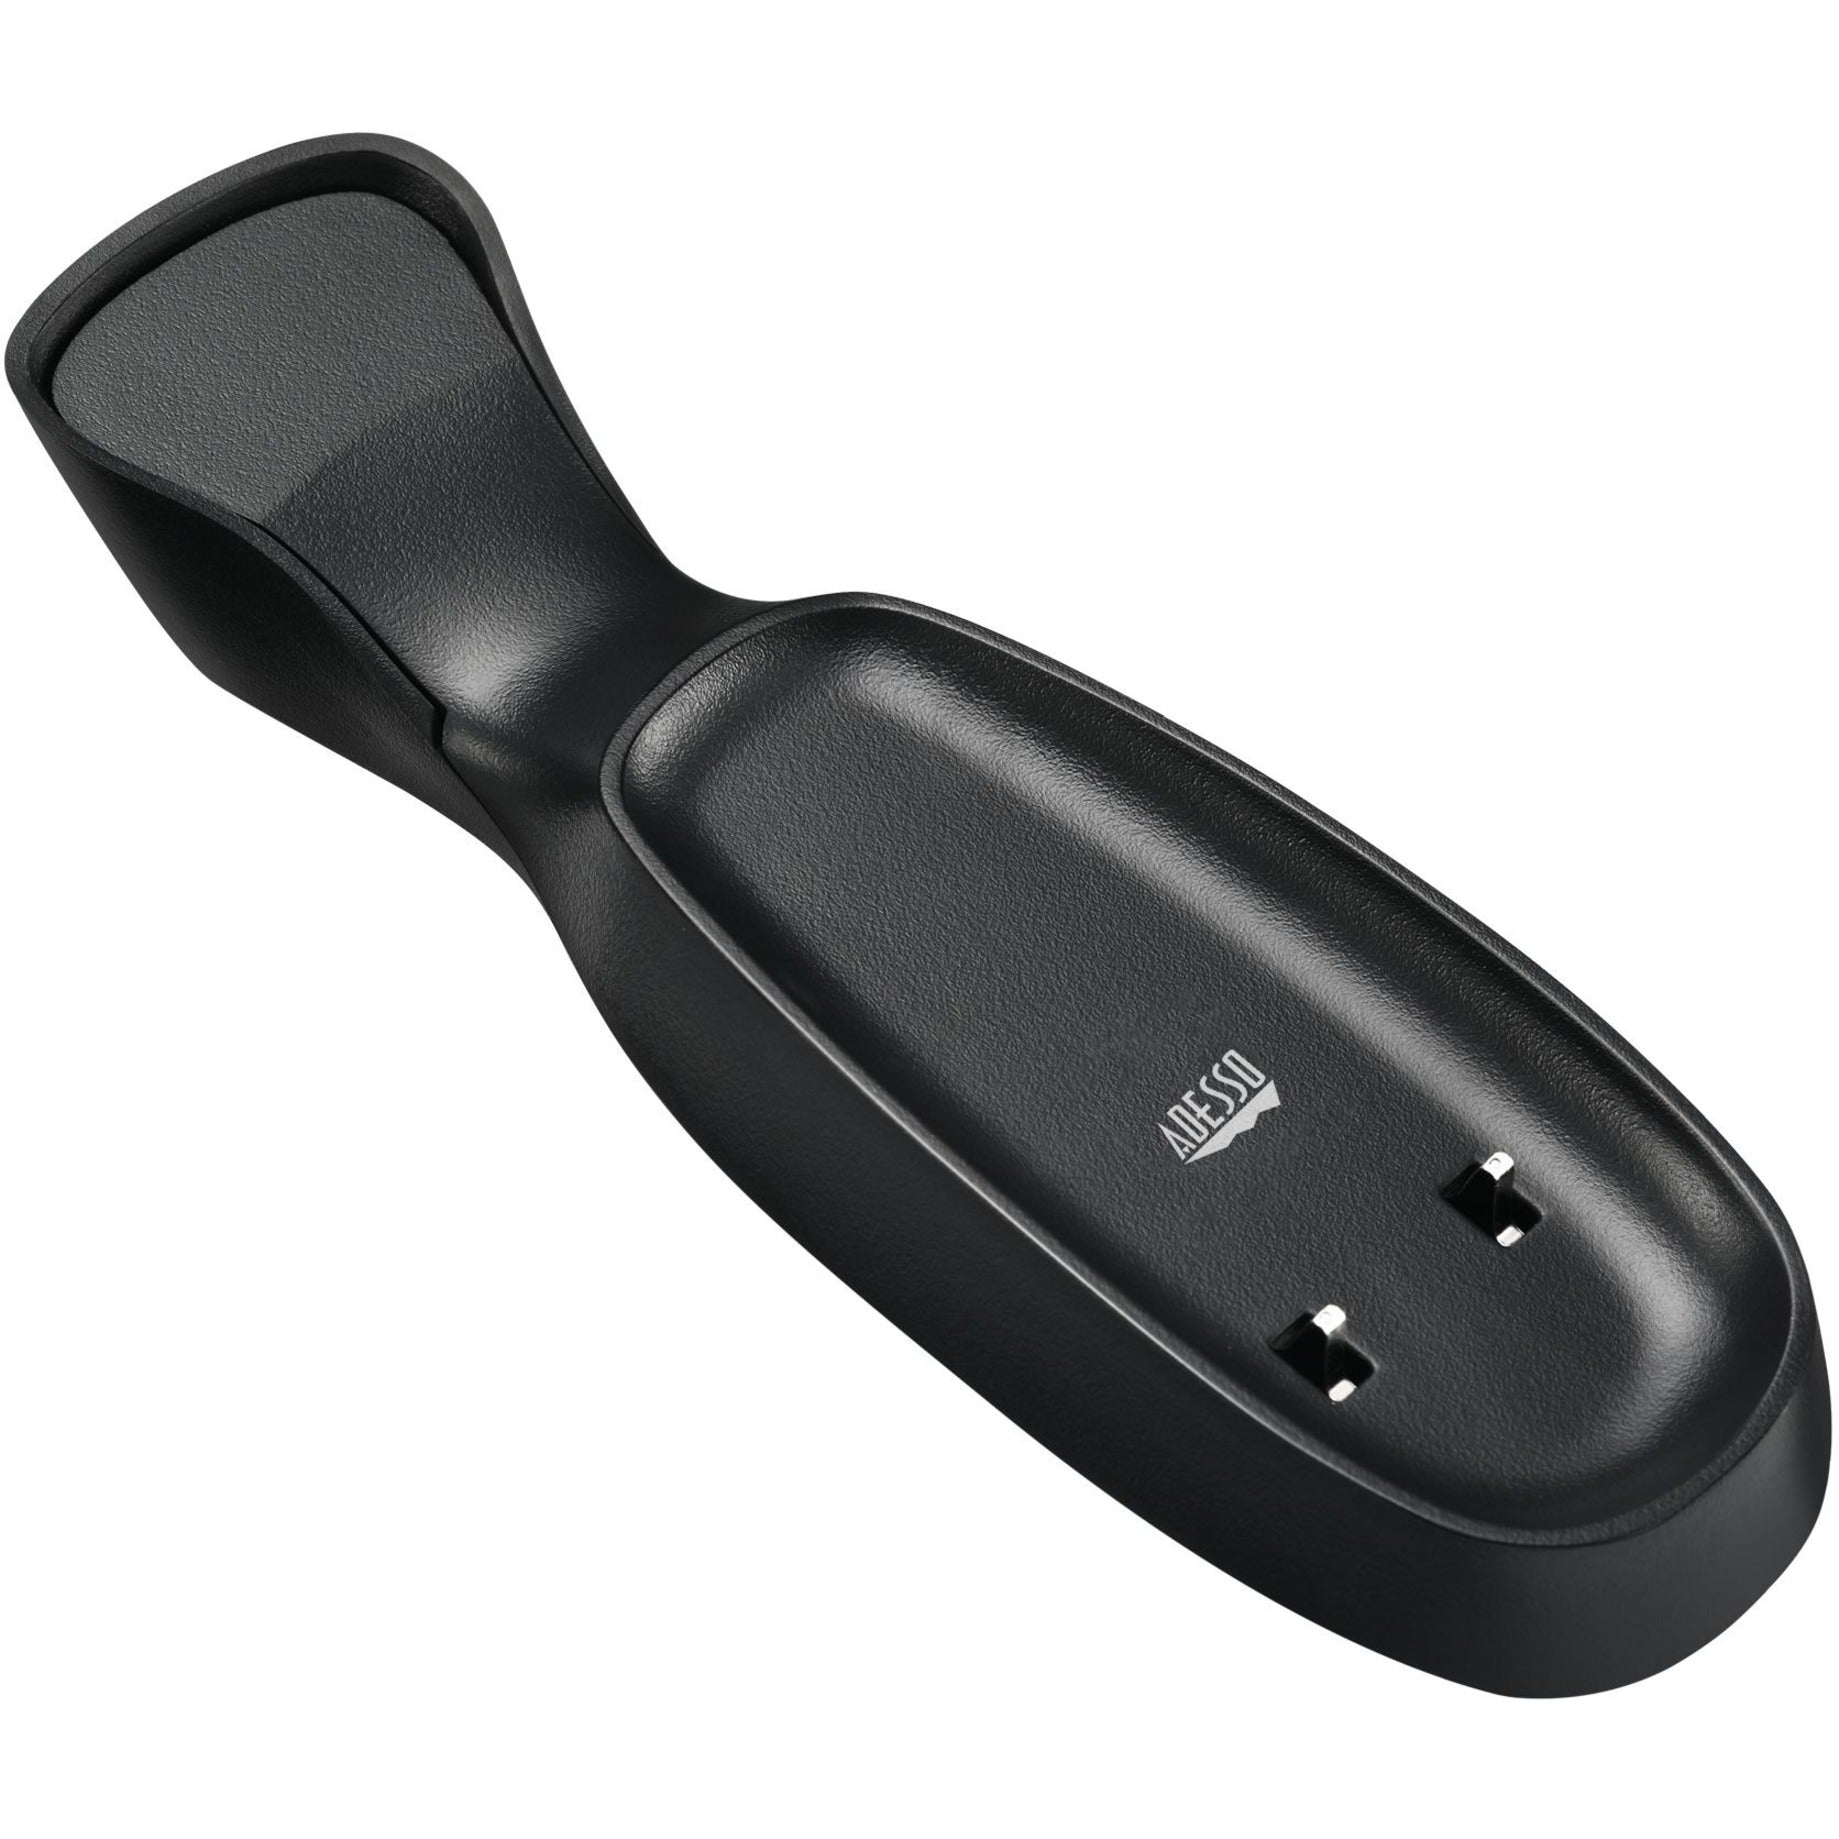 Adesso iMouse P30 Wireless Presenter Mouse, Air Mouse Go Plus, Rechargeable, 9 Buttons